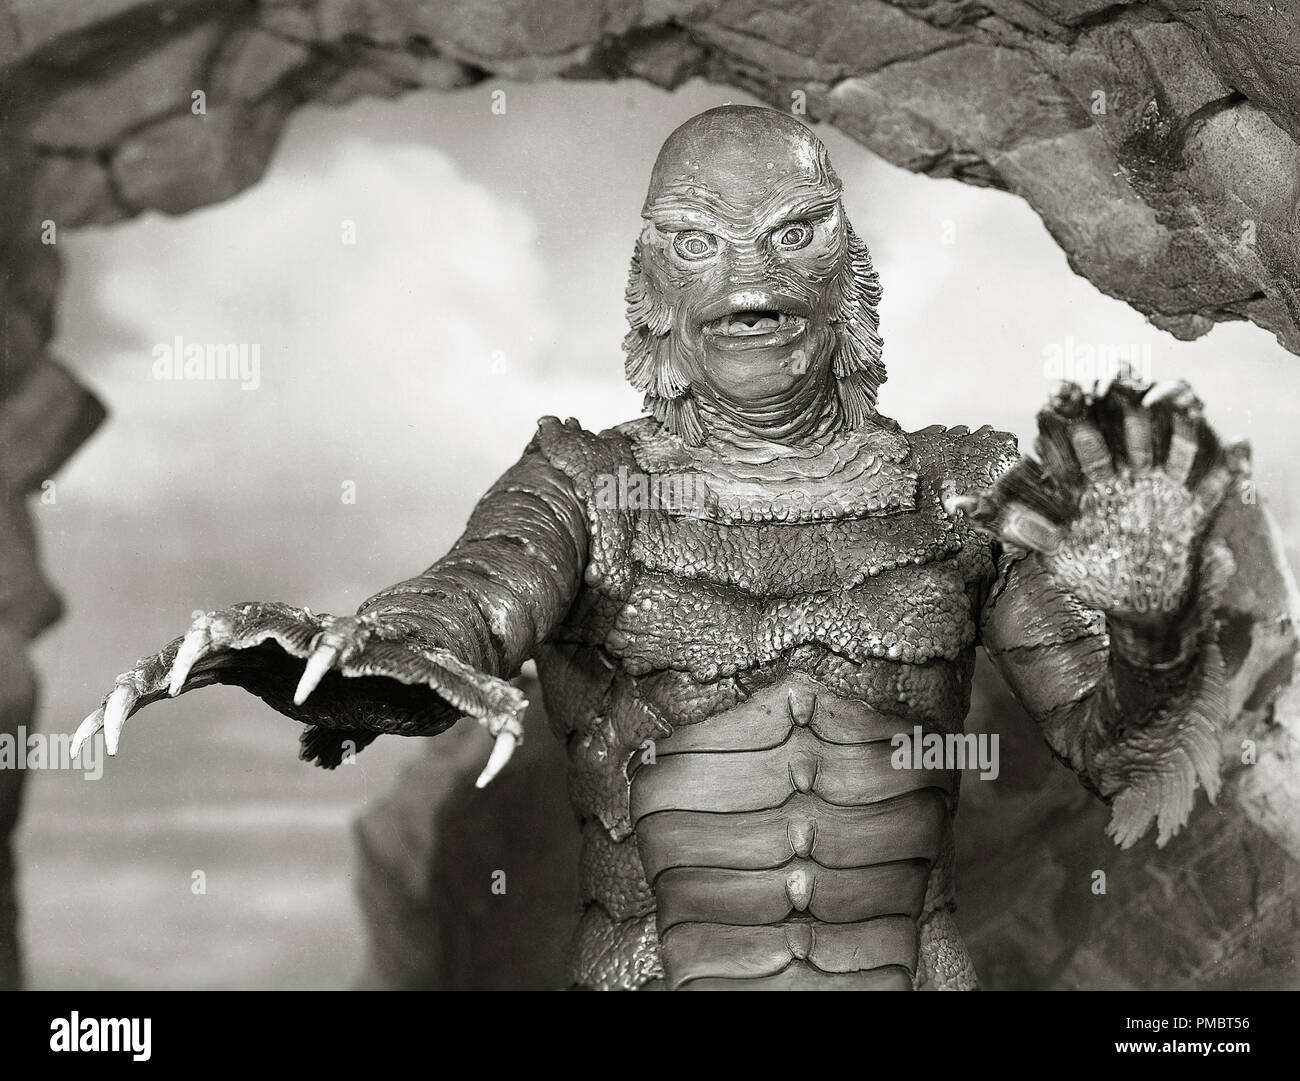 Creature from the Black Lagoon 1954 Universal  File Reference # 32914 287THA Stock Photo